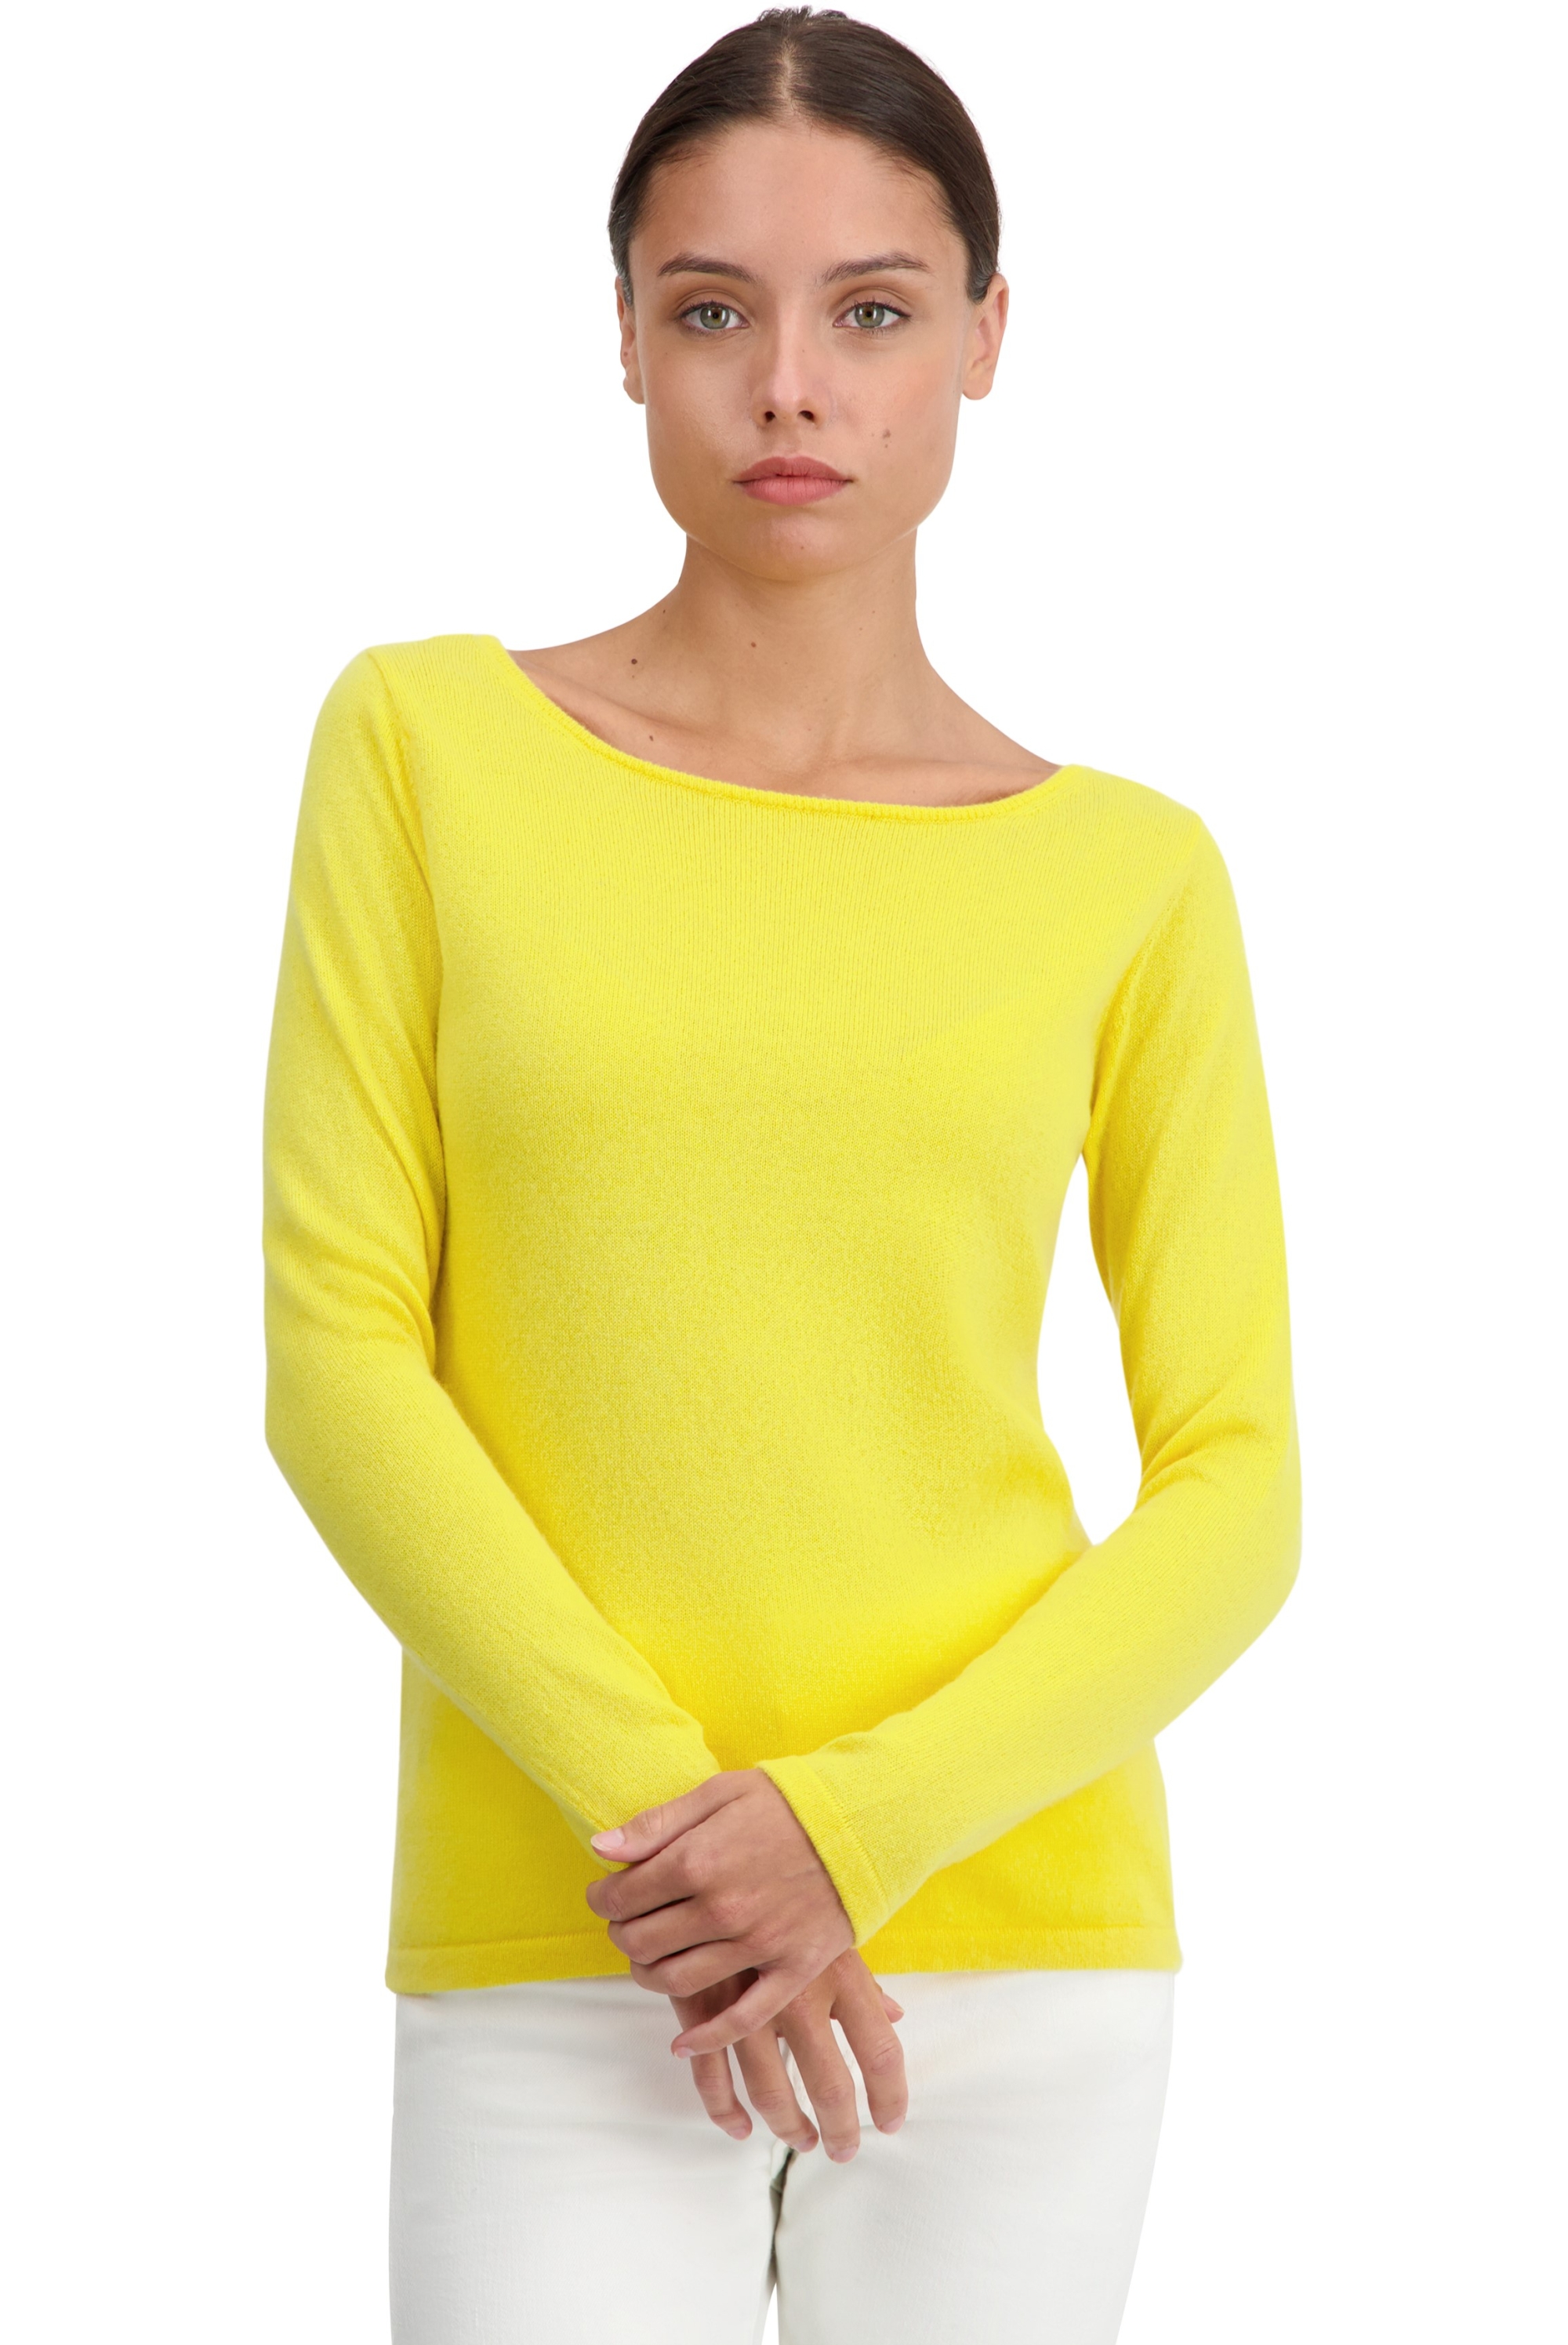 Cachemire pull femme collection printemps ete tennessy first daffodil s